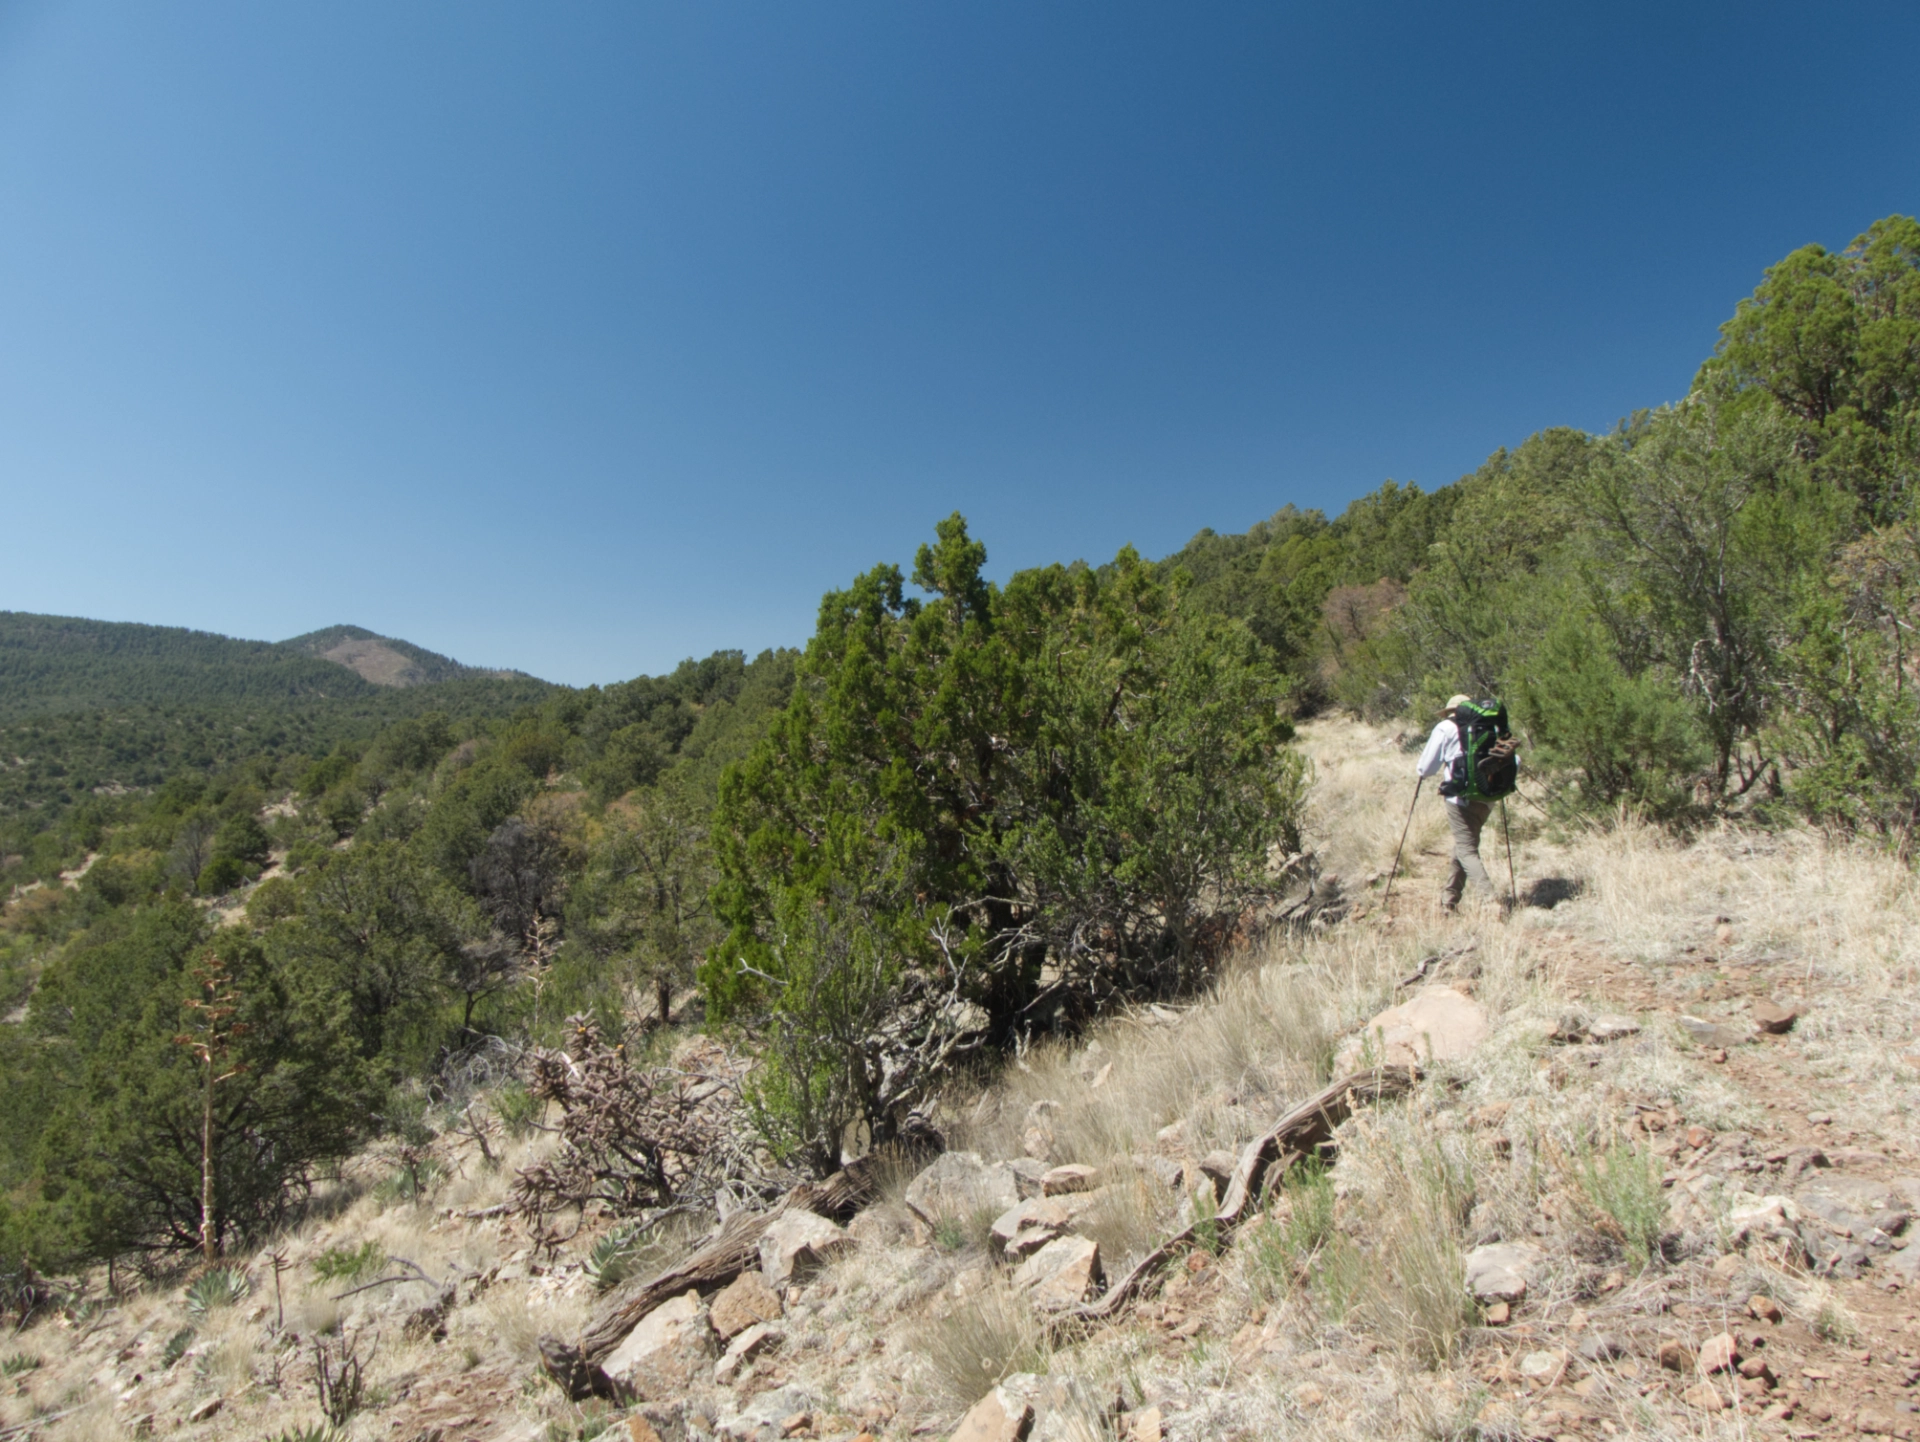 hiker on rocky trail with distant views